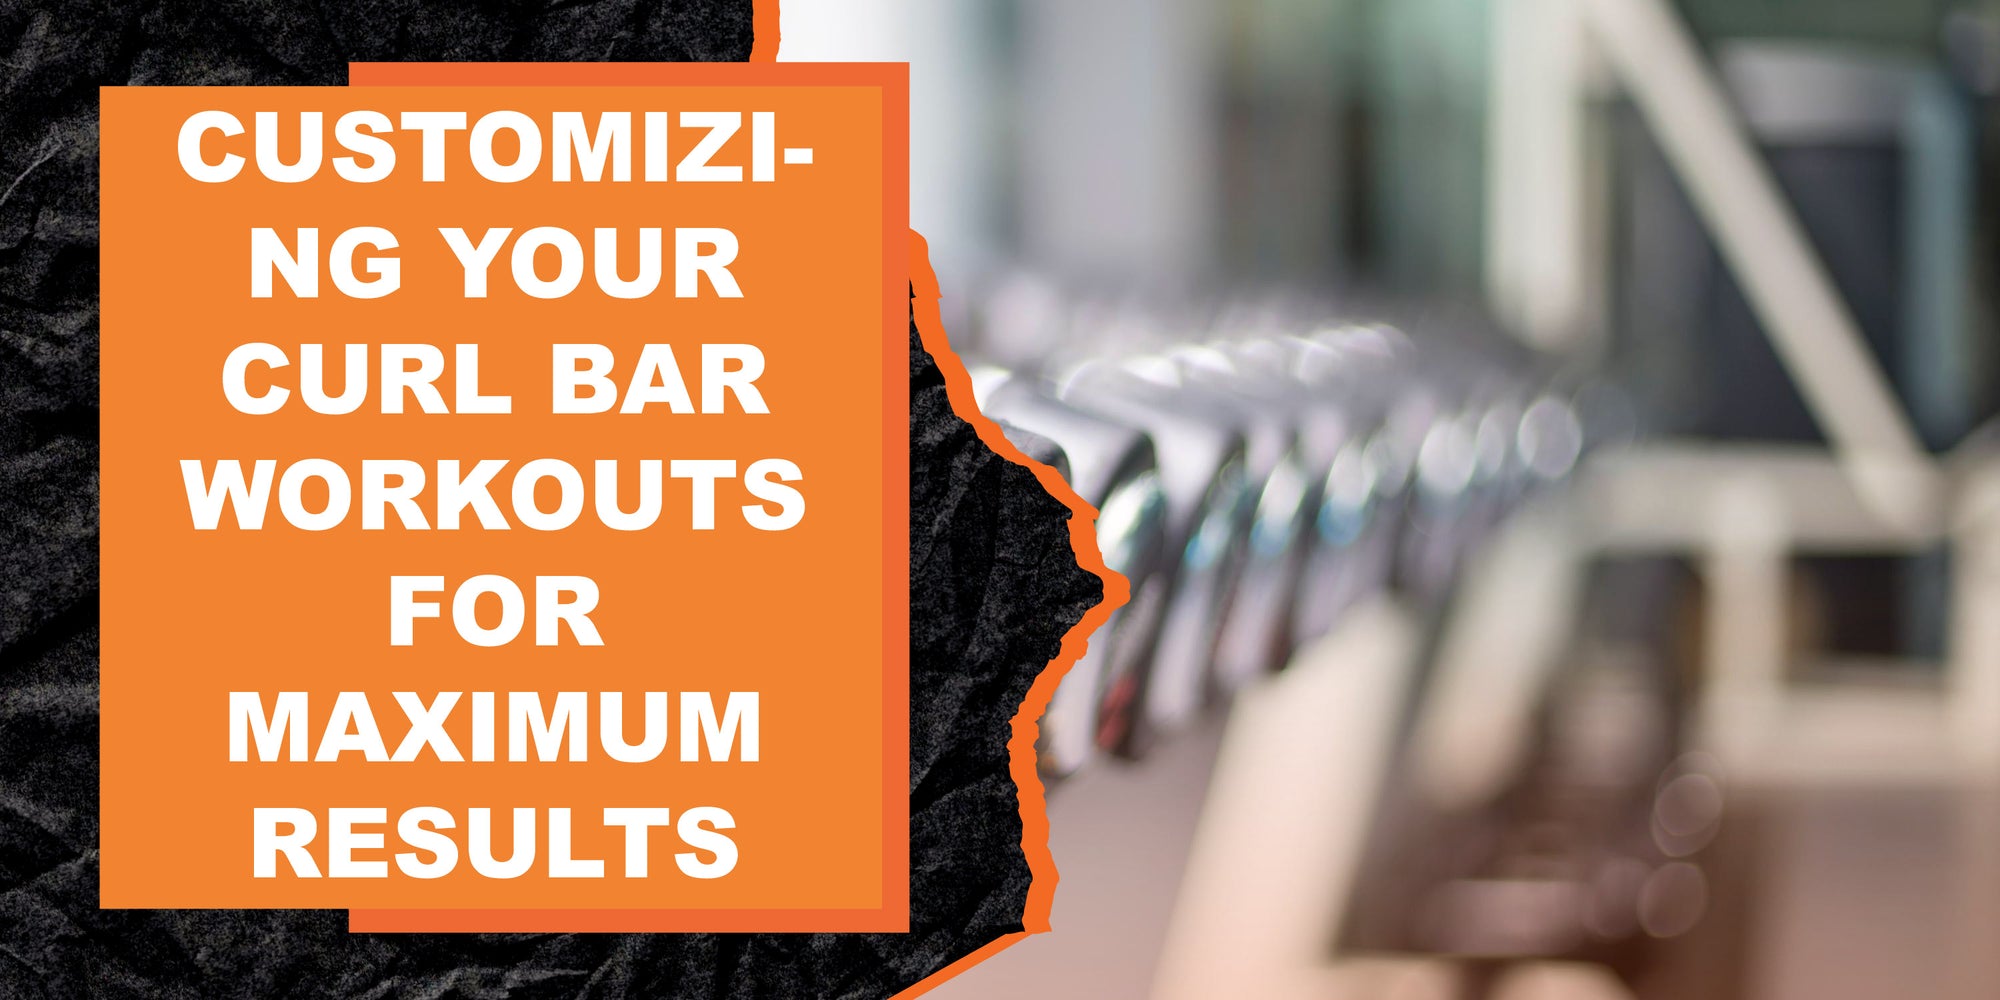 Customizing Your Curl Bar Workouts for Maximum Results